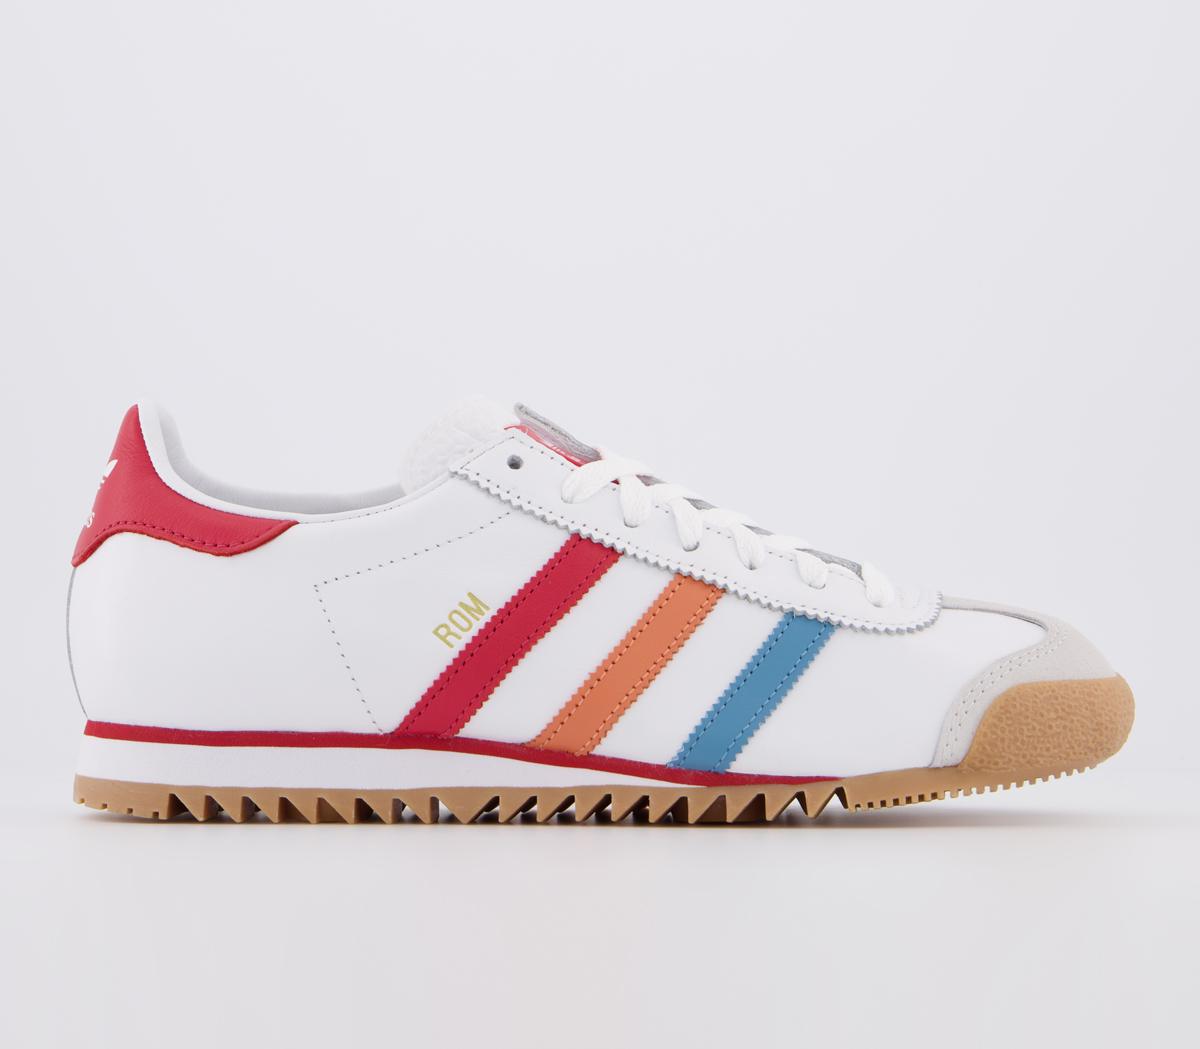 adidas Trainers Glory Red Amber Tint - Men's Trainers